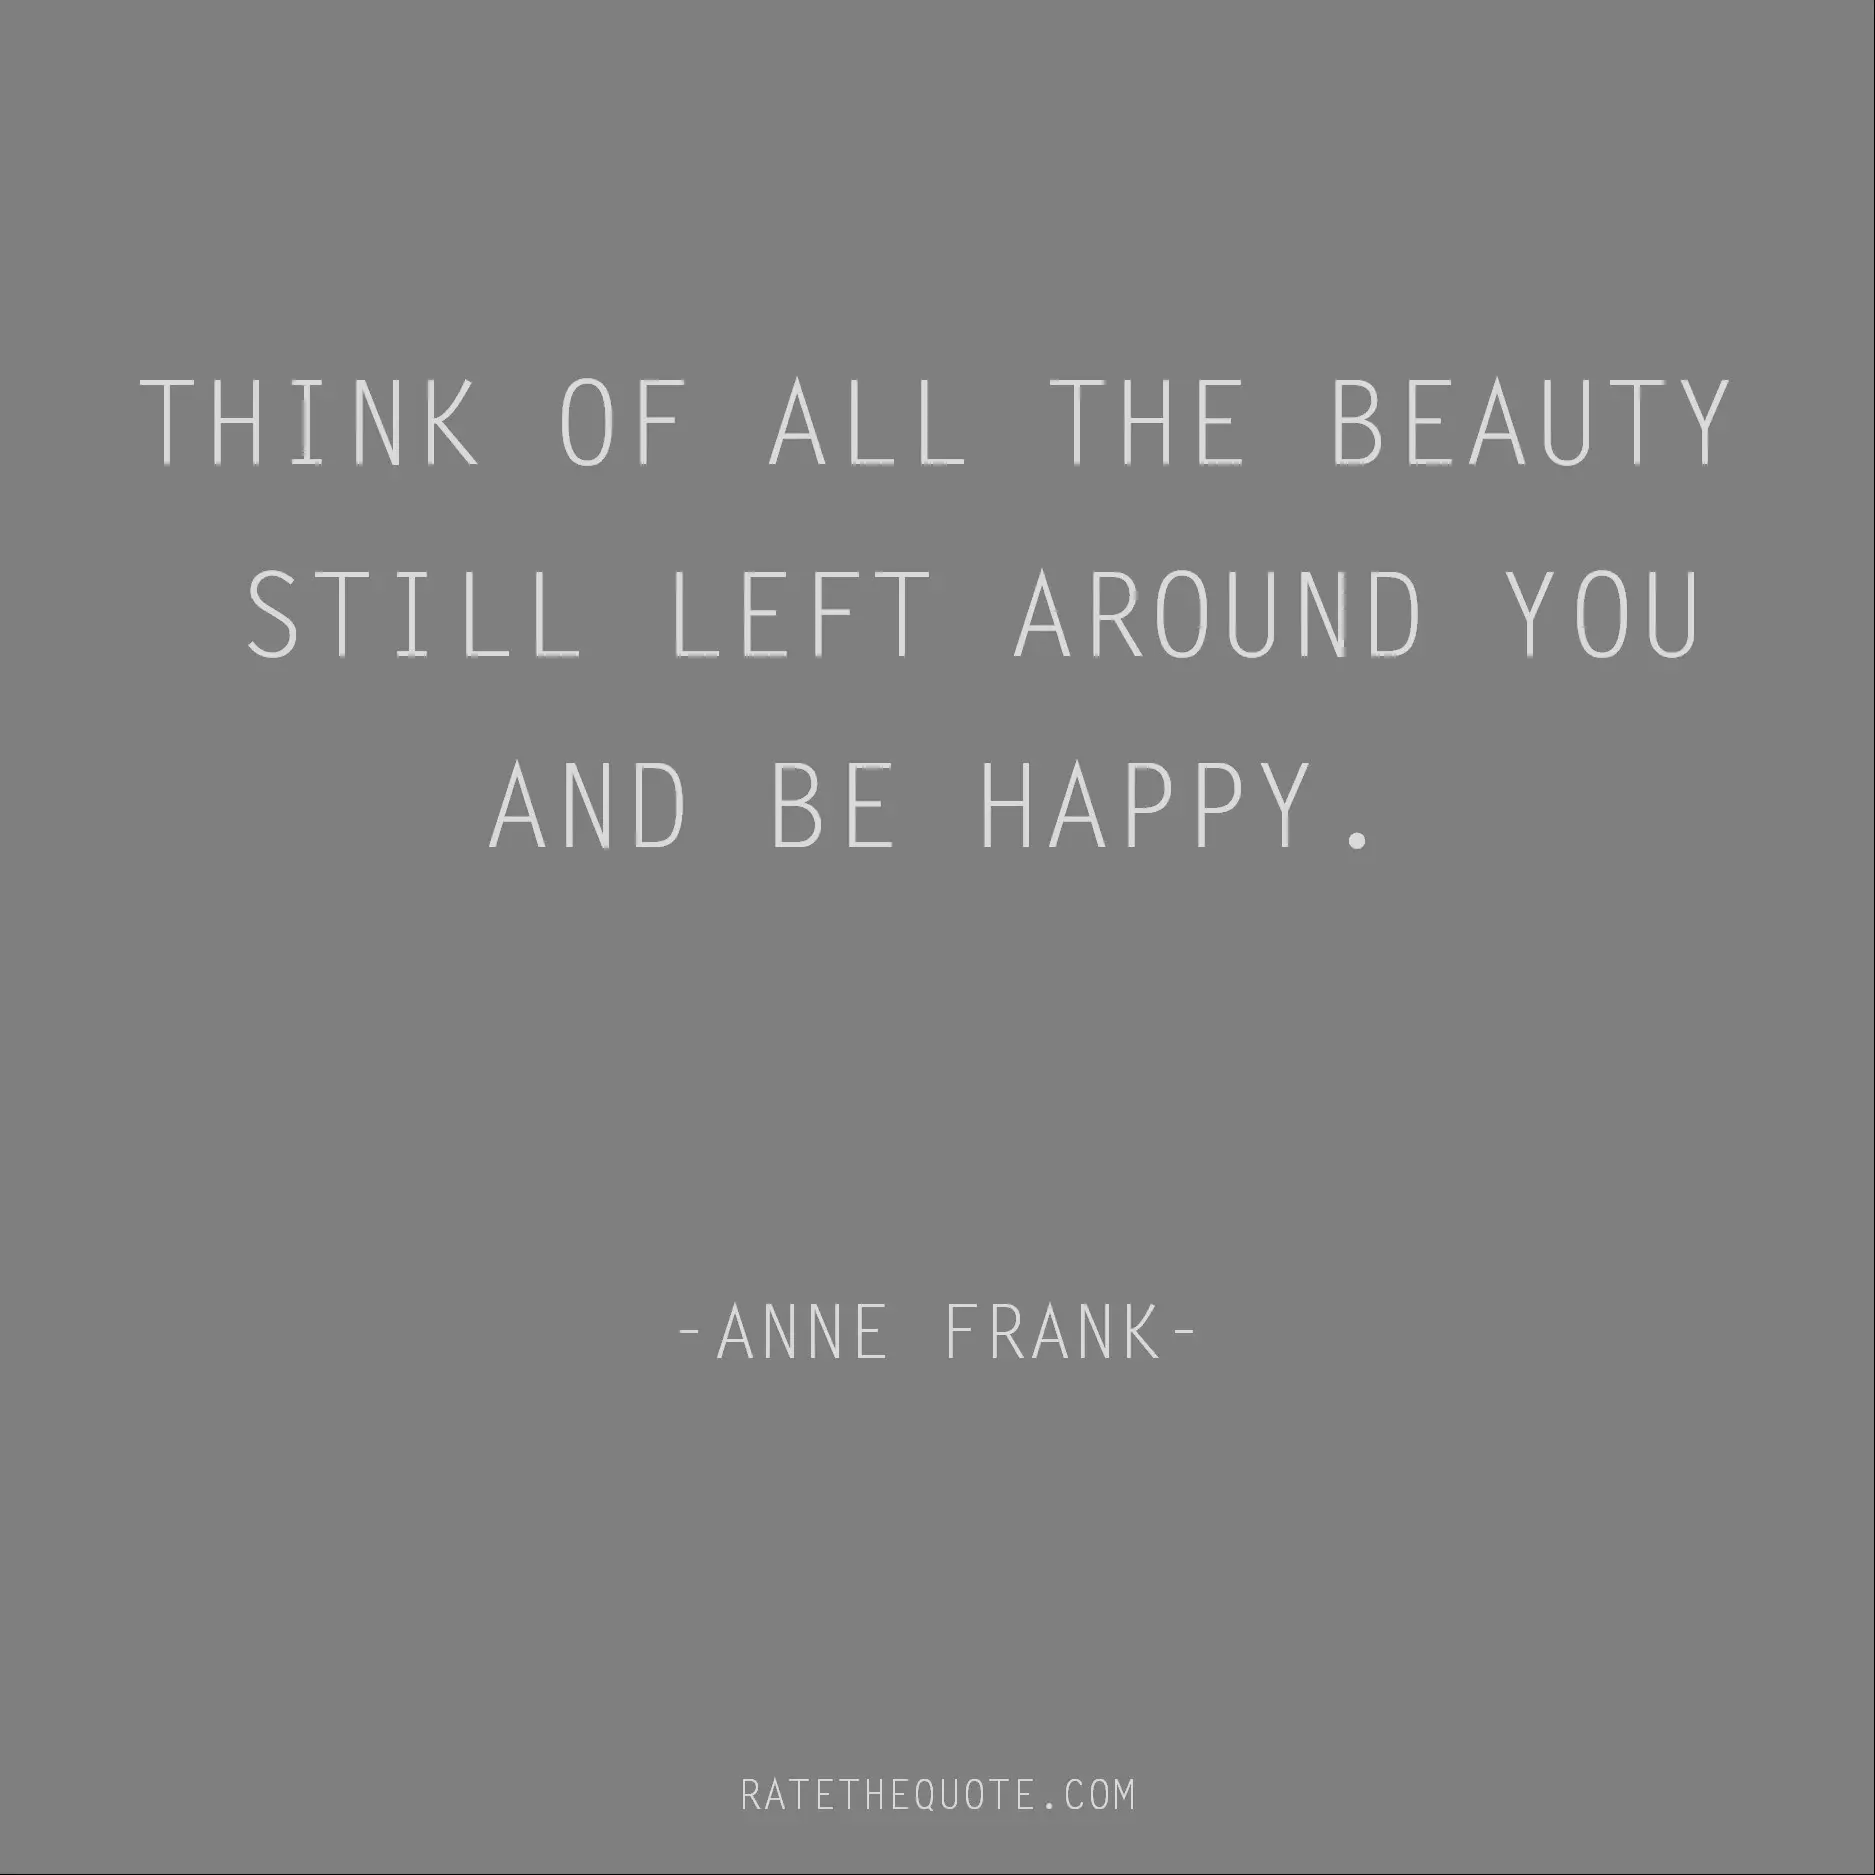 Beauty Quotes Think of all the beauty still left around you and be happy. Anne Frank